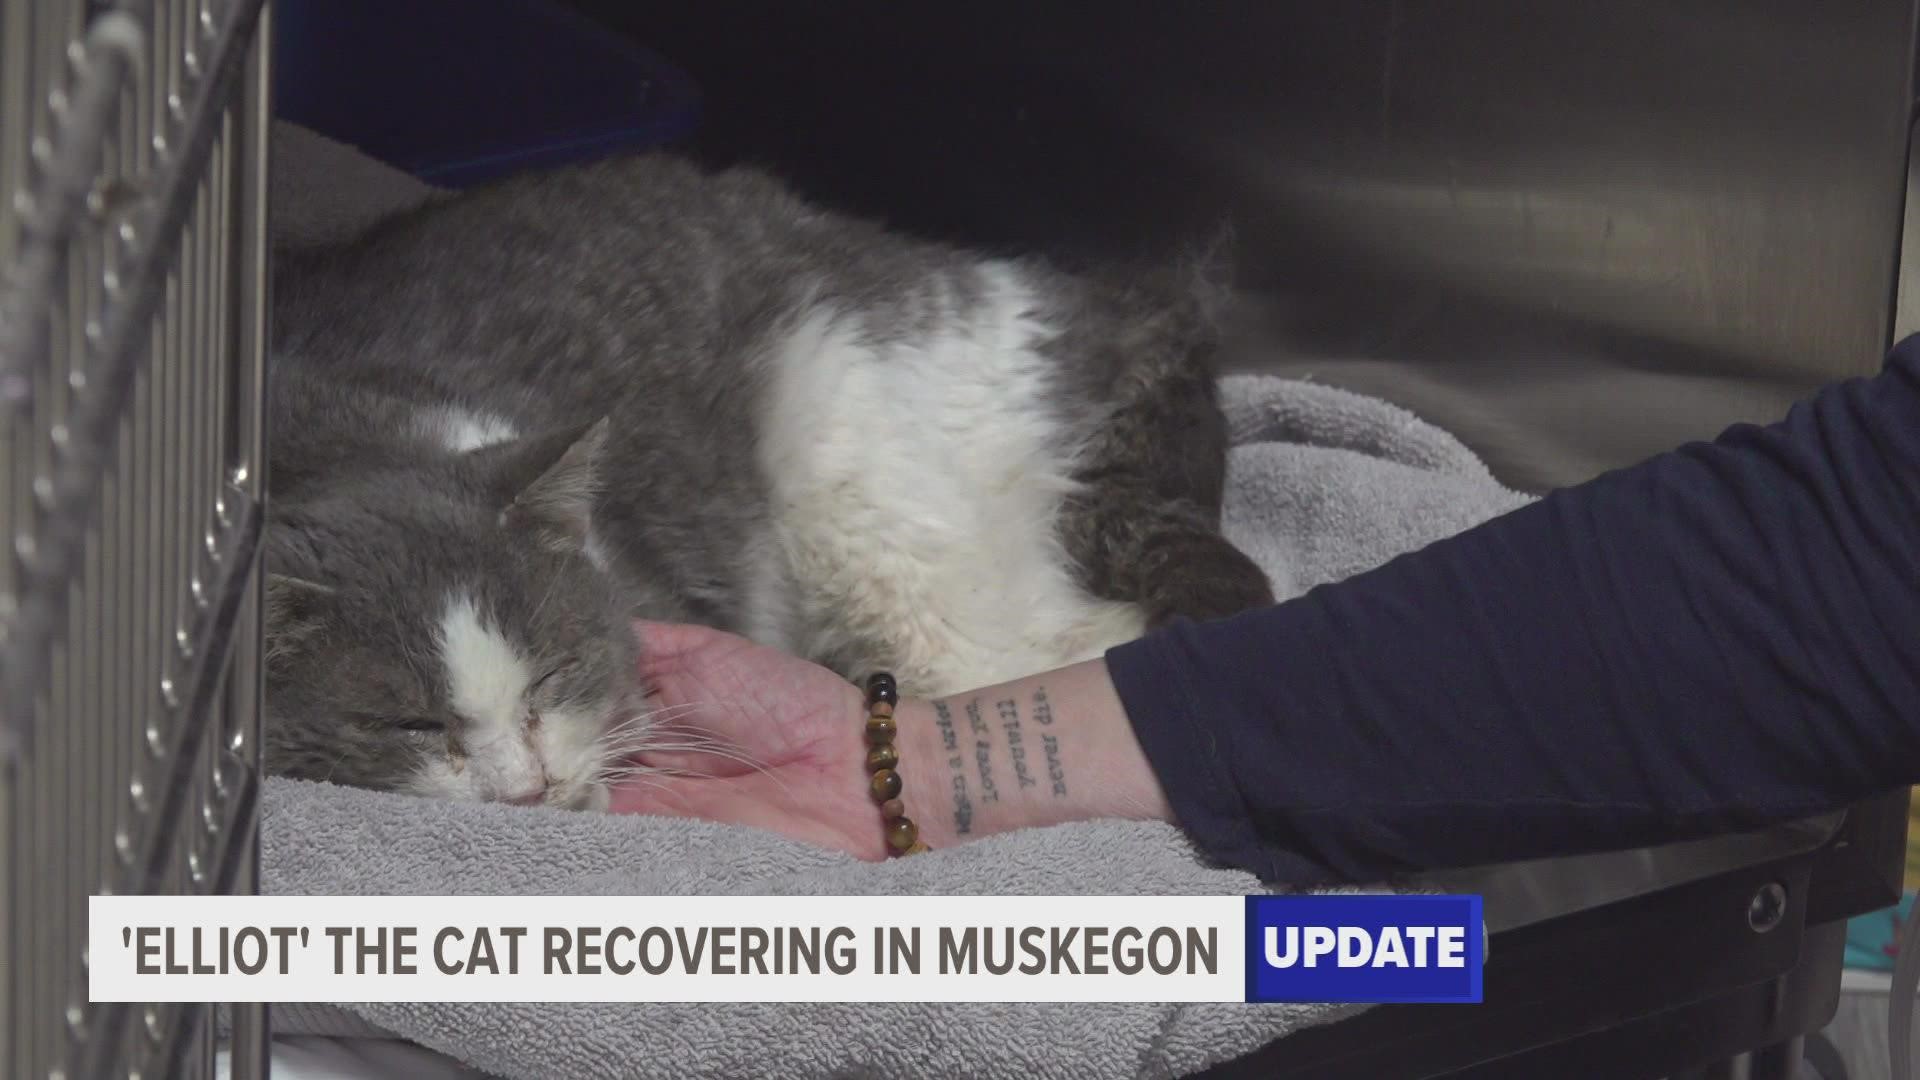 The cat found frozen to the ground in Muskegon is continuing to recover and regain his strength.